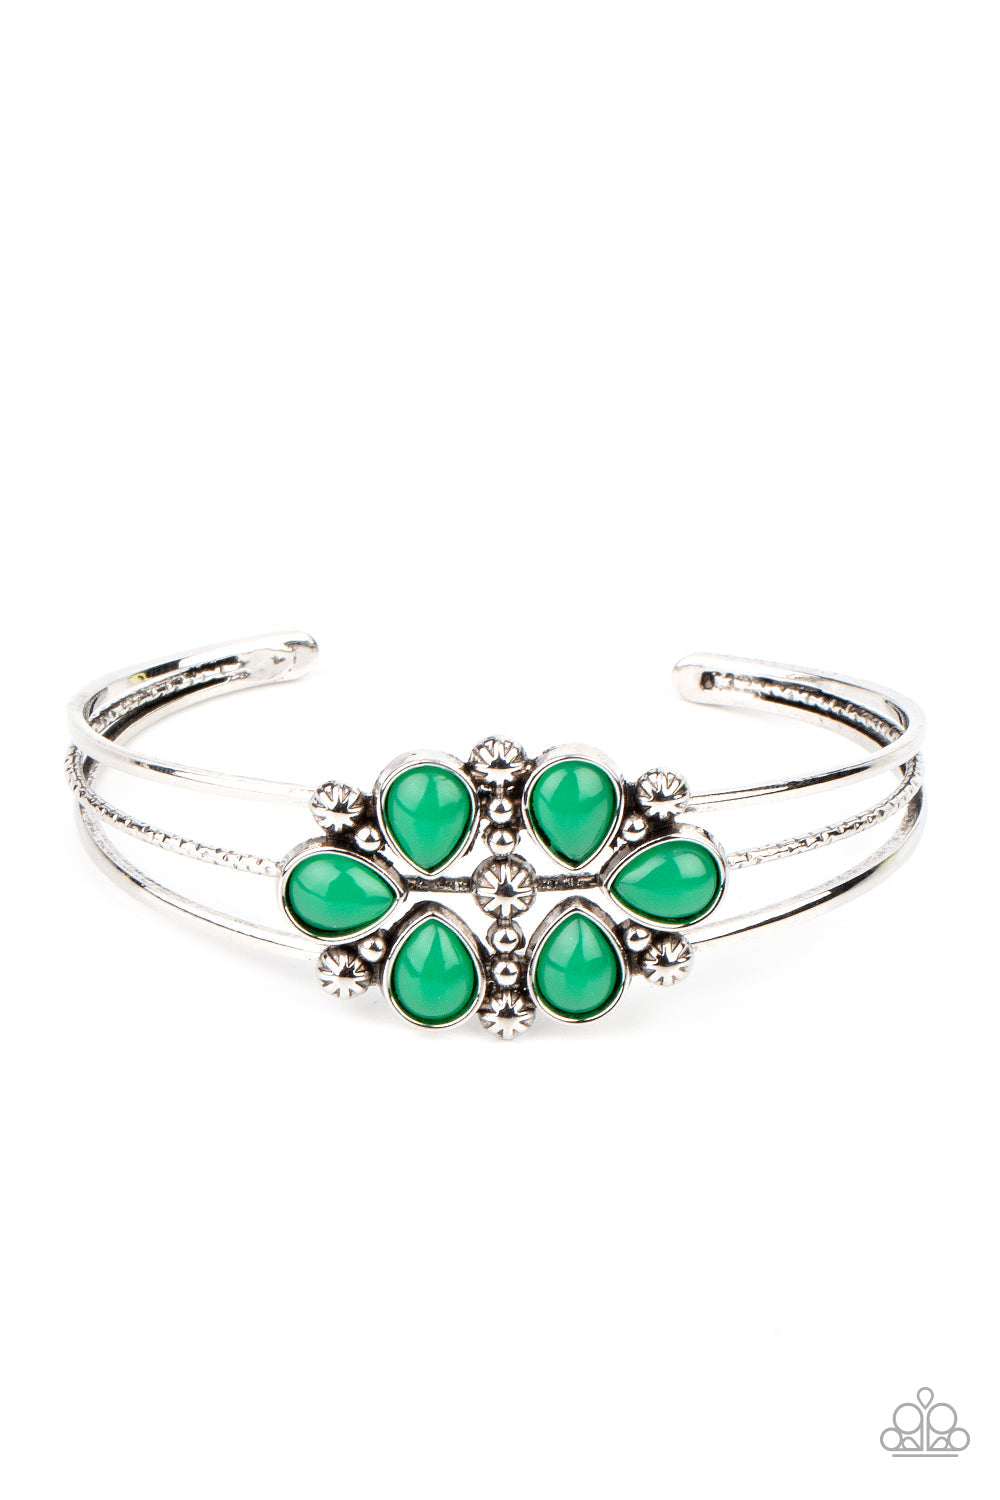 Taj Mahal Meadow - Green - Silver Floral Cuff Bracelet - Paparazzi Accessories - Trendy fashion jewelry for everyone - A whimsical collection of glassy Leprechaun teardrop beads, dainty silver studs, and silver floral accents coalesce into a colorful centerpiece atop a layered silver cuff. Sold as one individual bracelet.